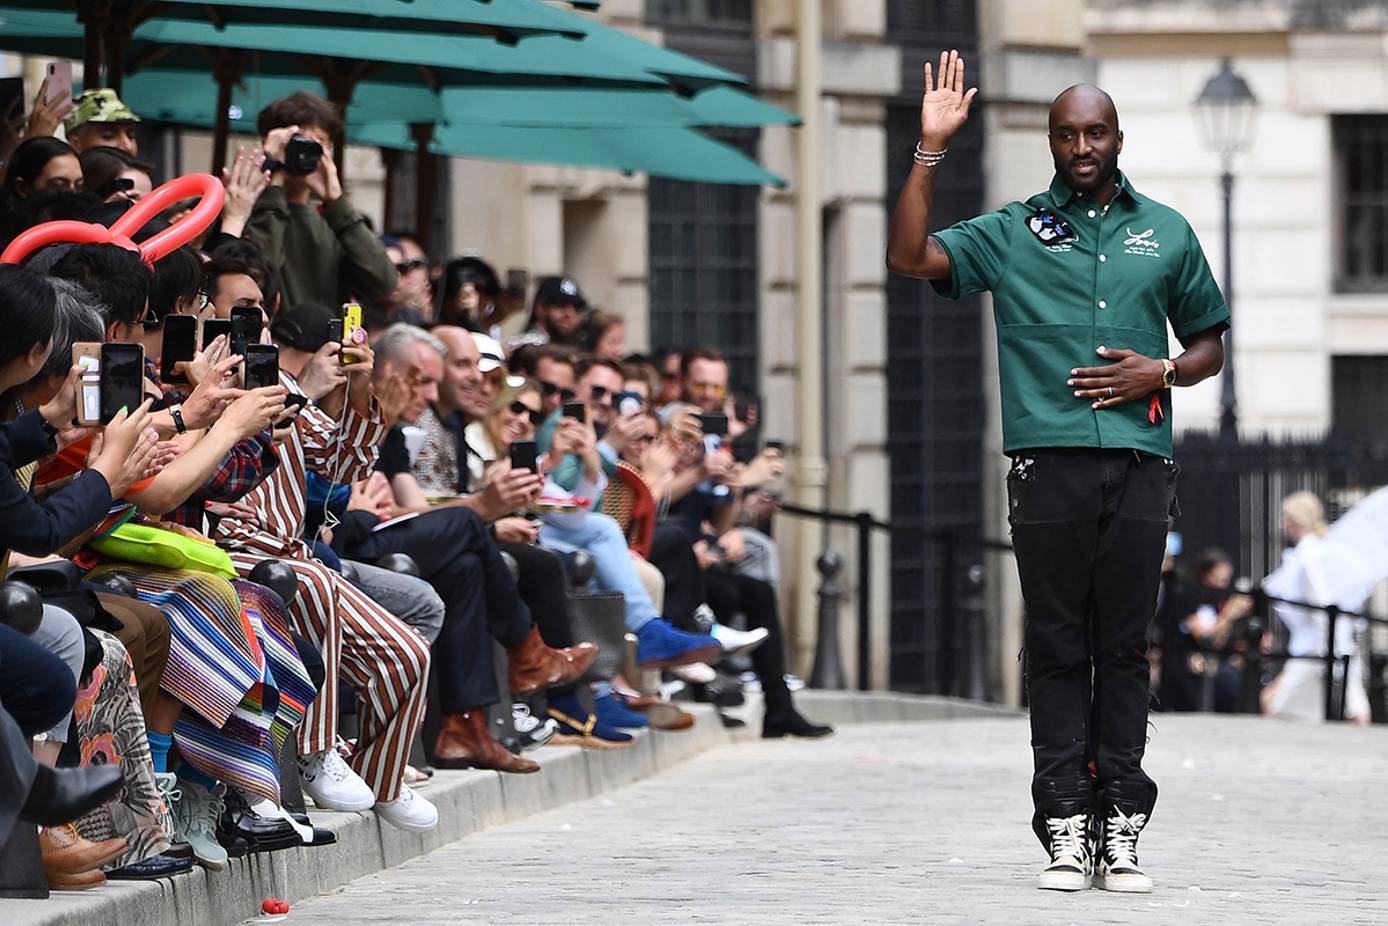 a show to remember - virgil abloh's last collection for louis vuitton in  miami